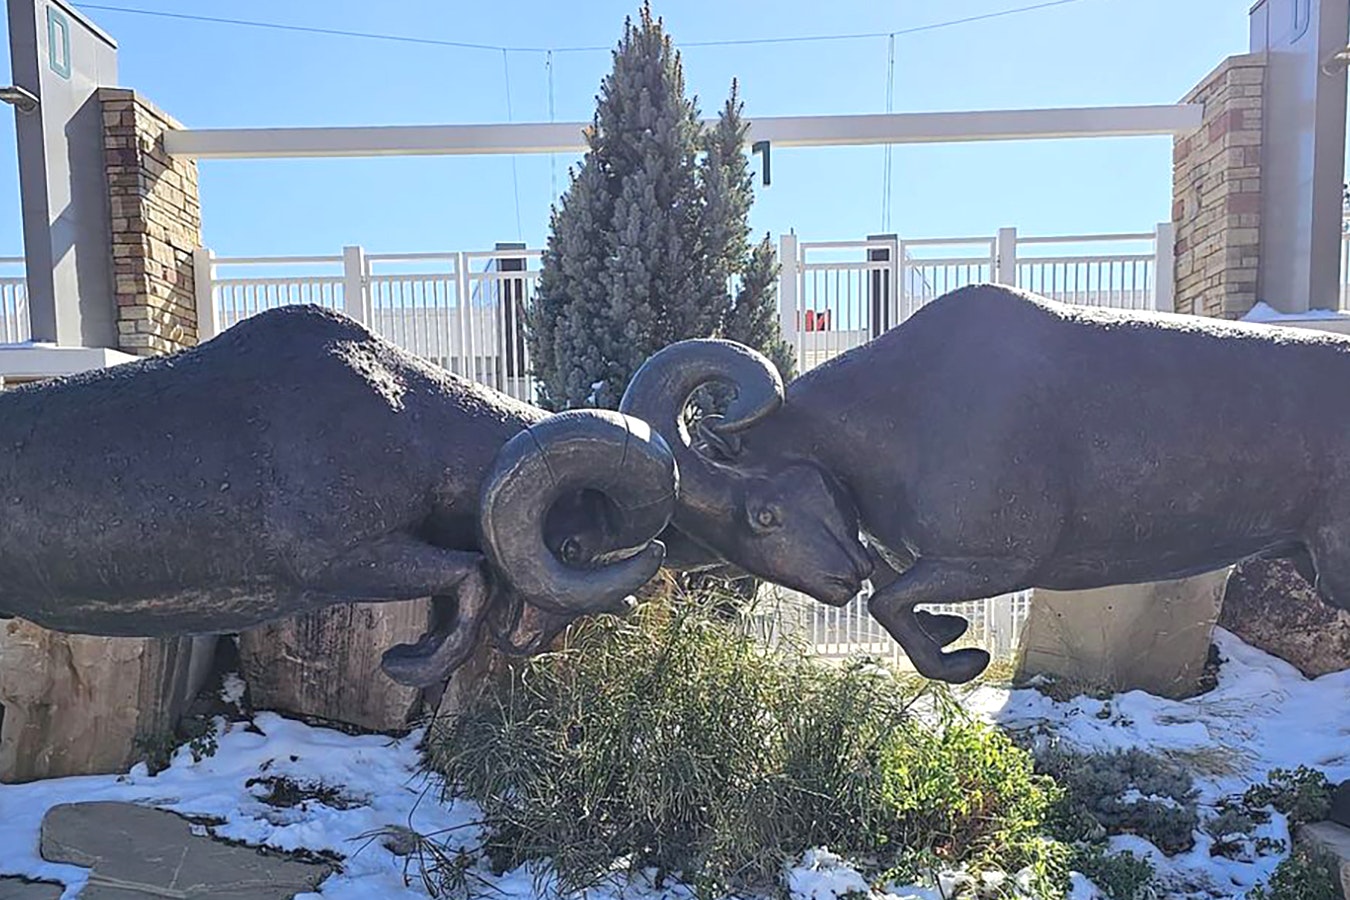 Someone painted "UW" brands on these bronze bighorn sheep outside the stadium on the Colorado State University campus.